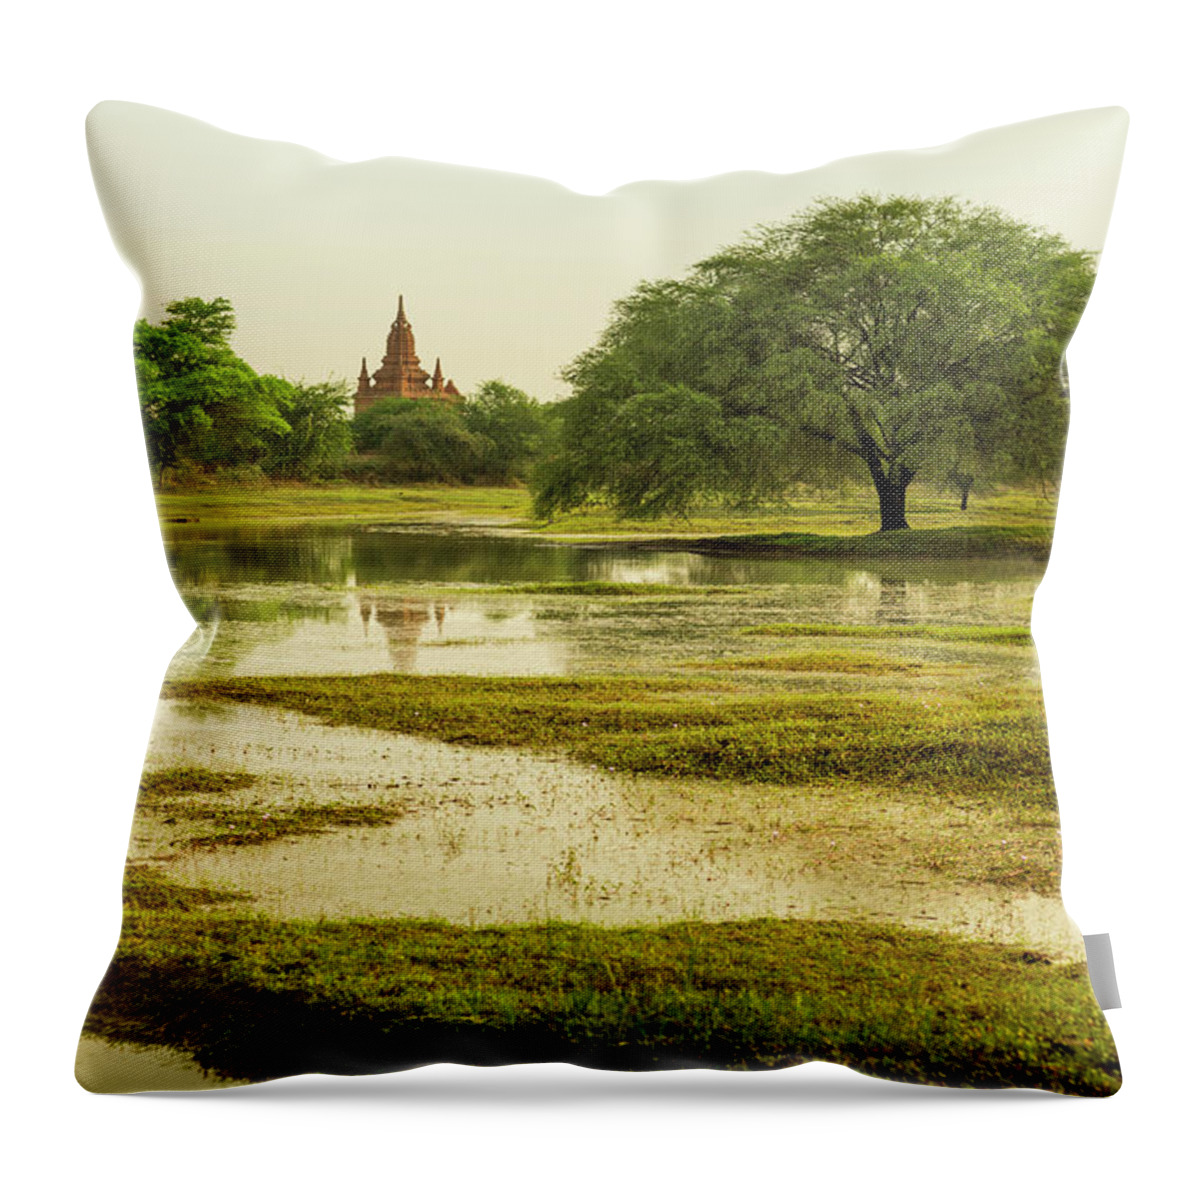 Grass Throw Pillow featuring the photograph Lush Landscape With Wide Tree And Temple by Merten Snijders